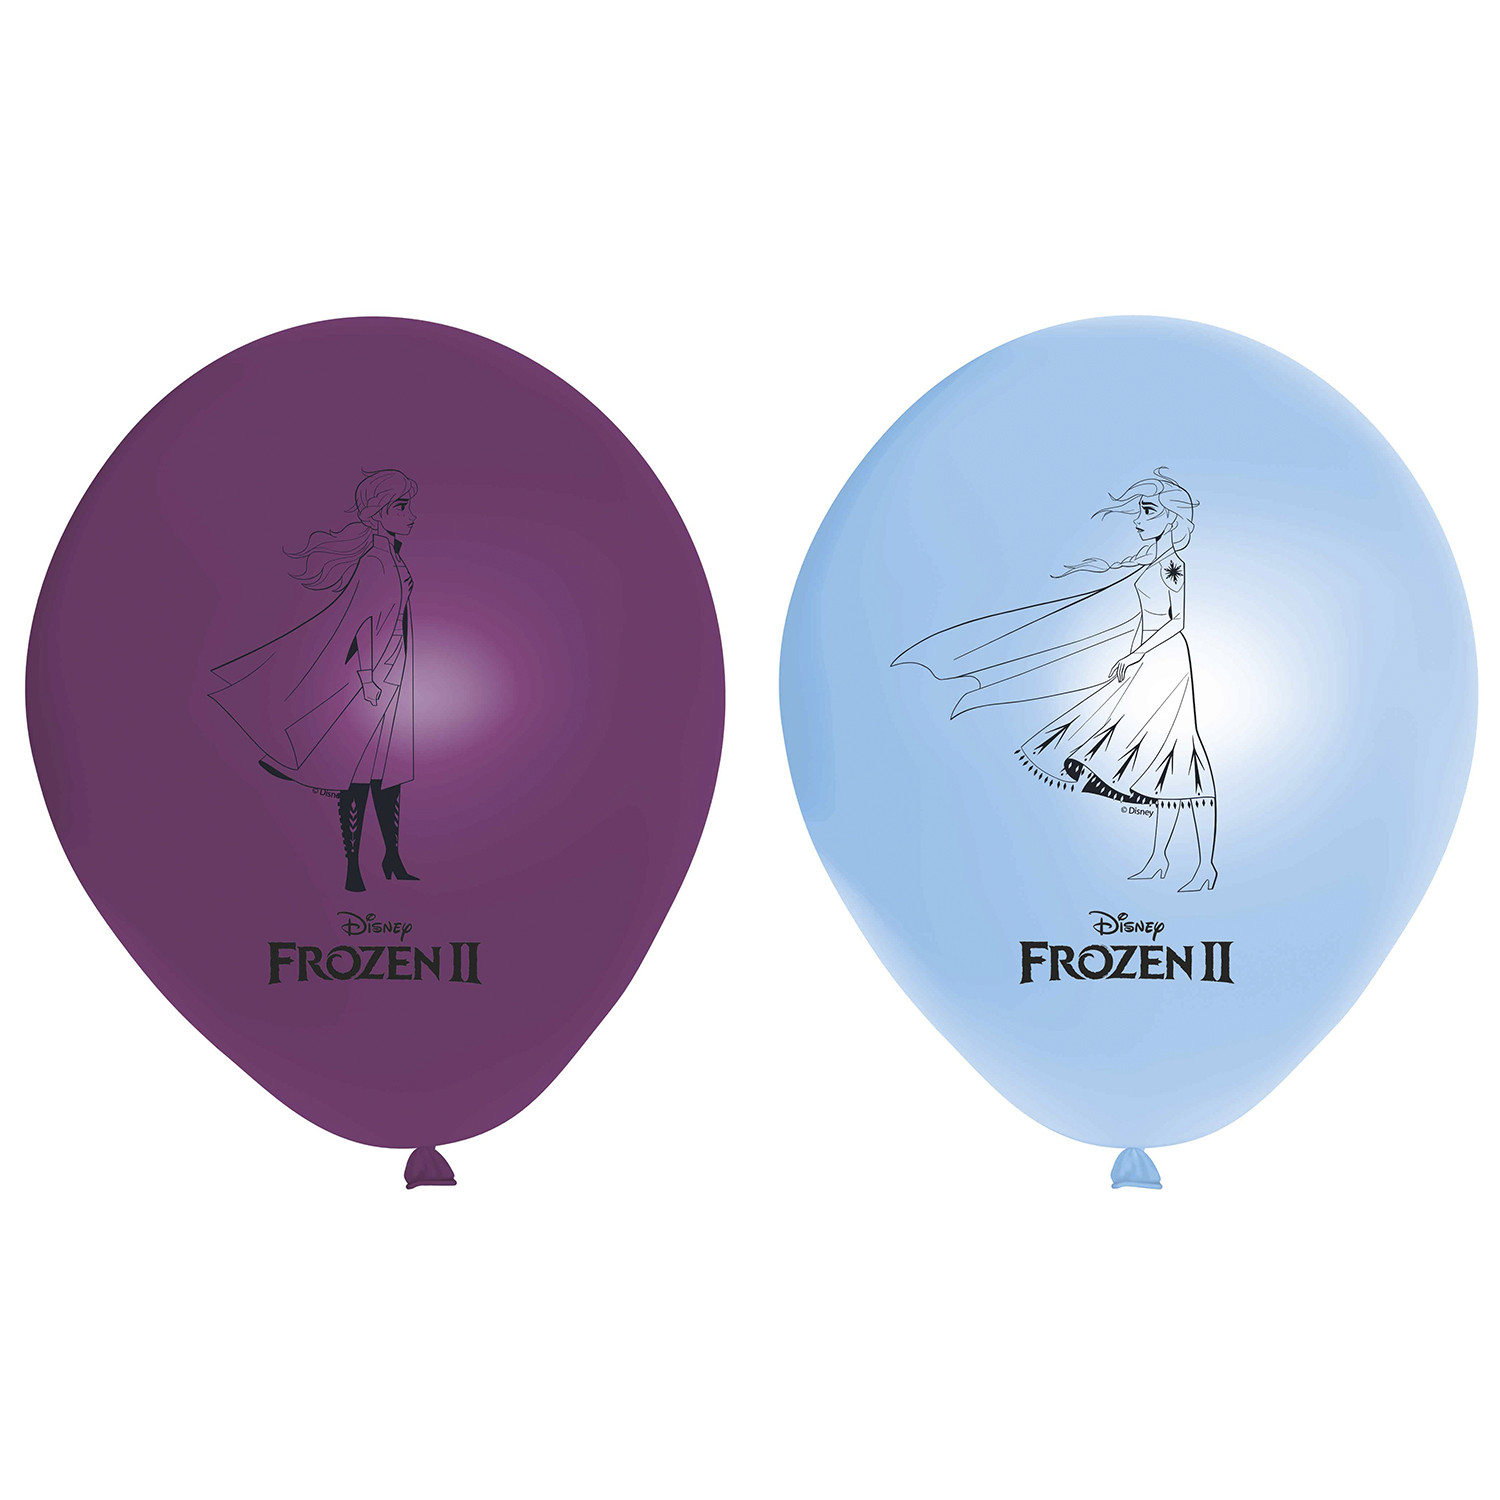 Frozen 2 Latex Balloon 8 Pack in Assorted styles Image